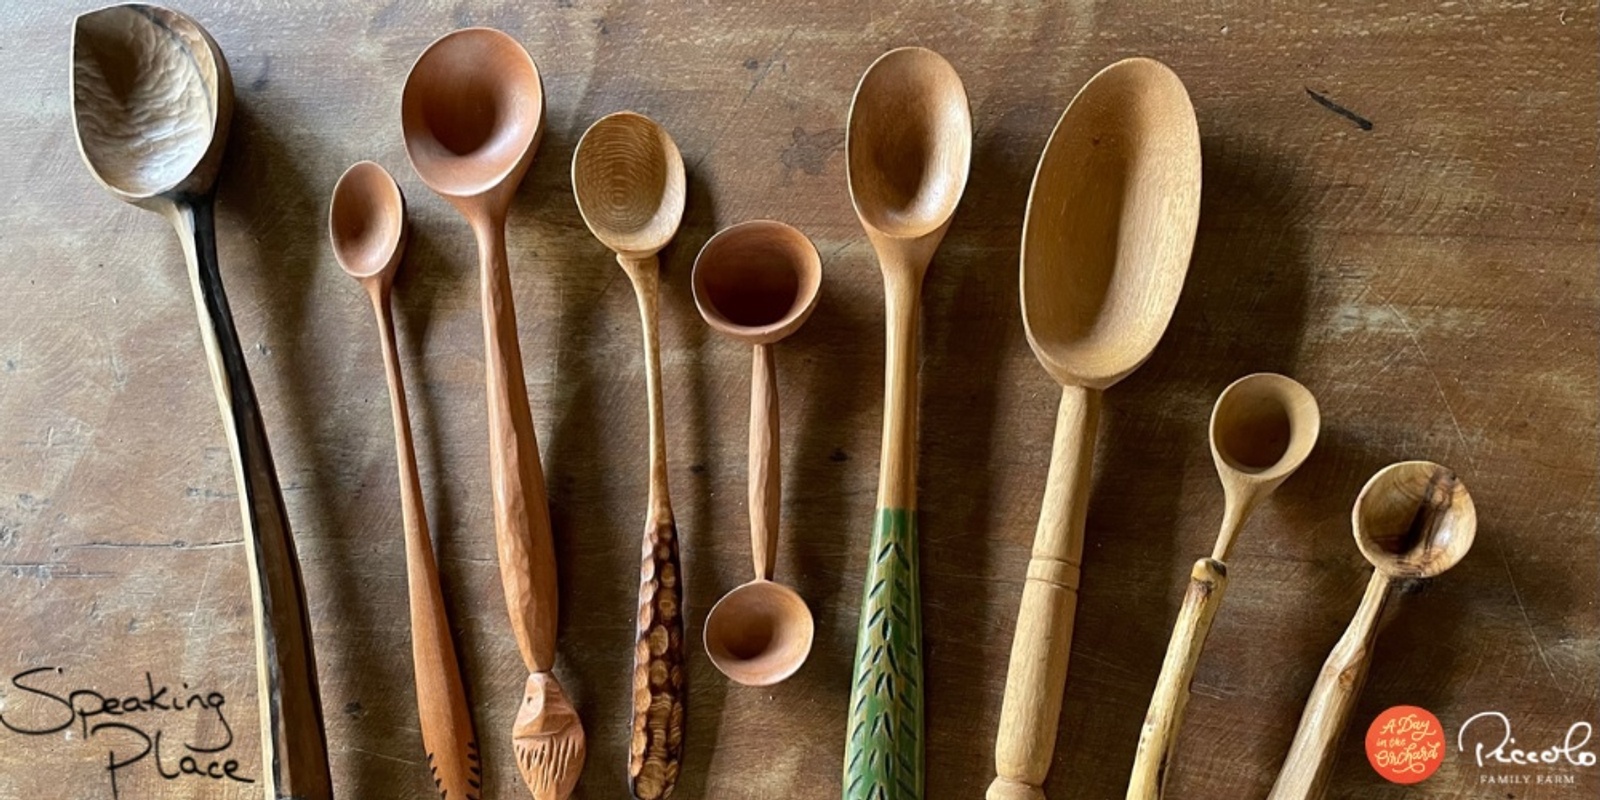 Banner image for Speaking Place - Spoon Carving Workshop